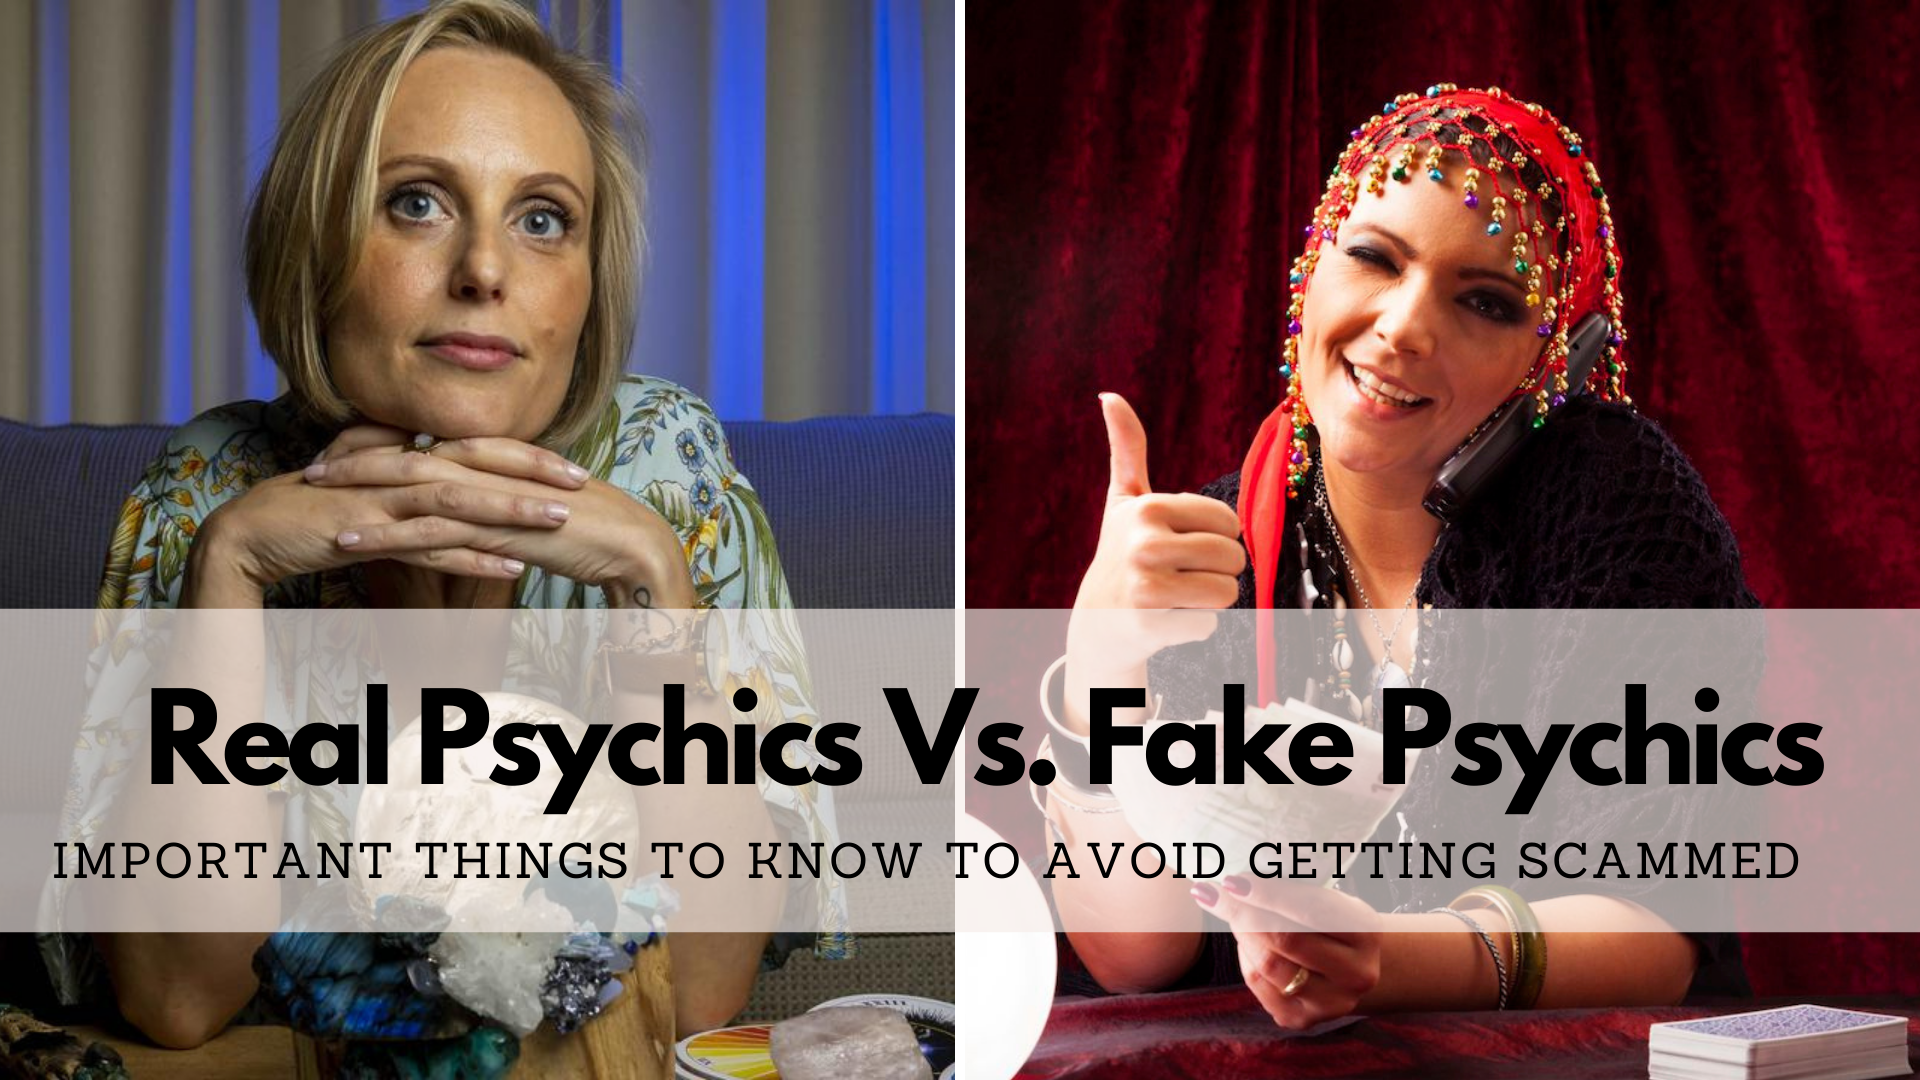 Real Psychics Vs. Fake Psychics - Things To Know To Avoid Getting Scammed